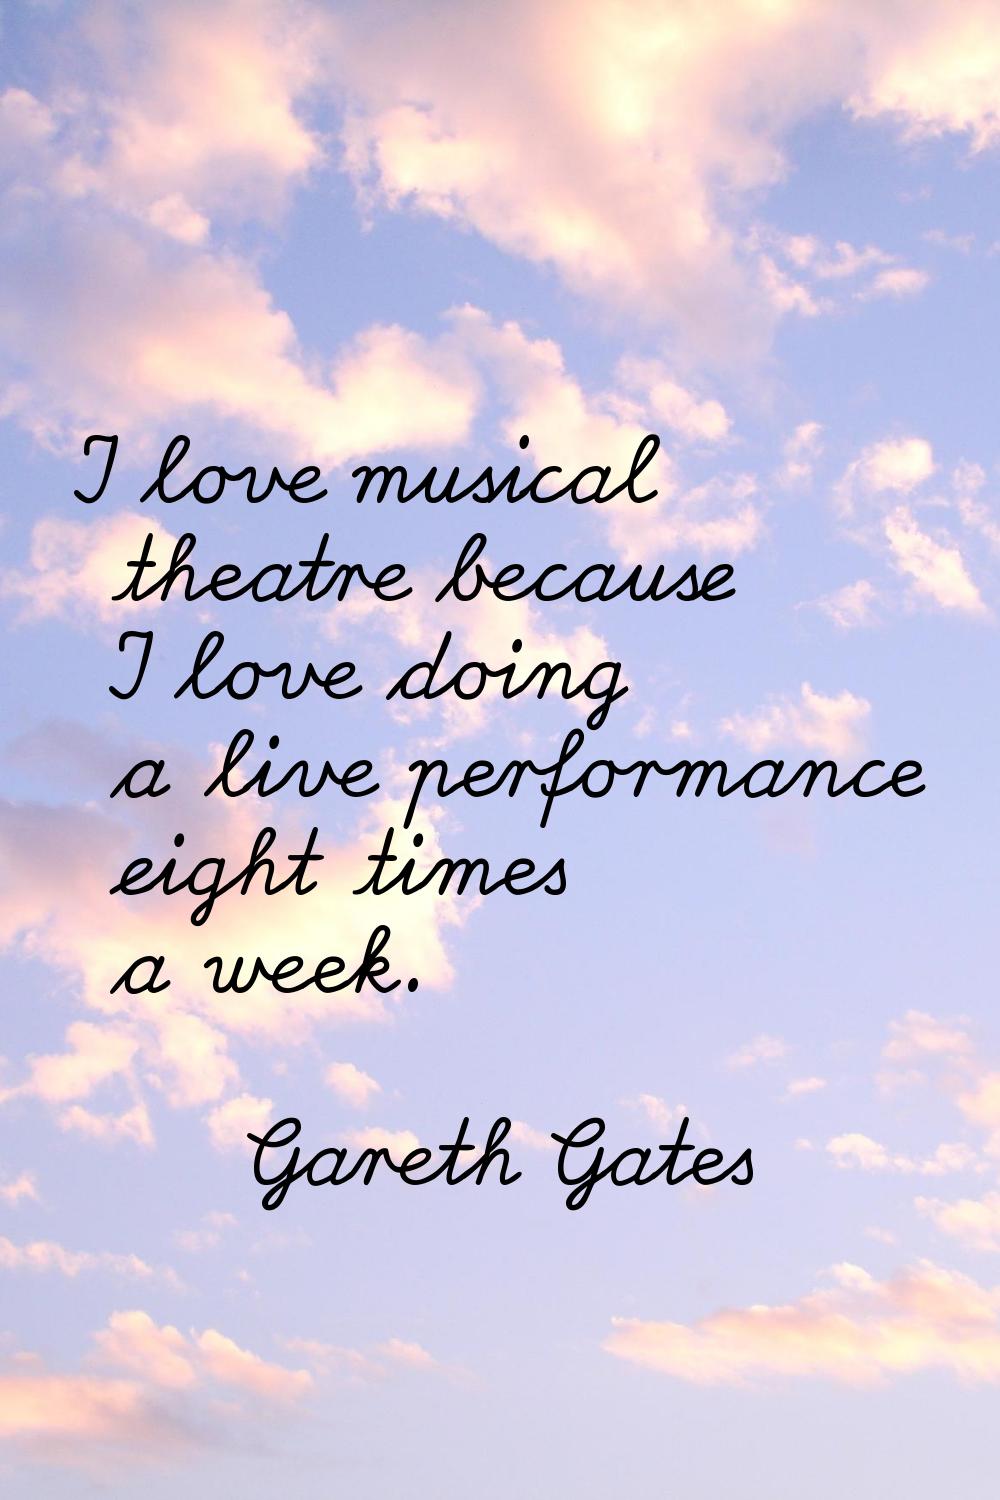 I love musical theatre because I love doing a live performance eight times a week.